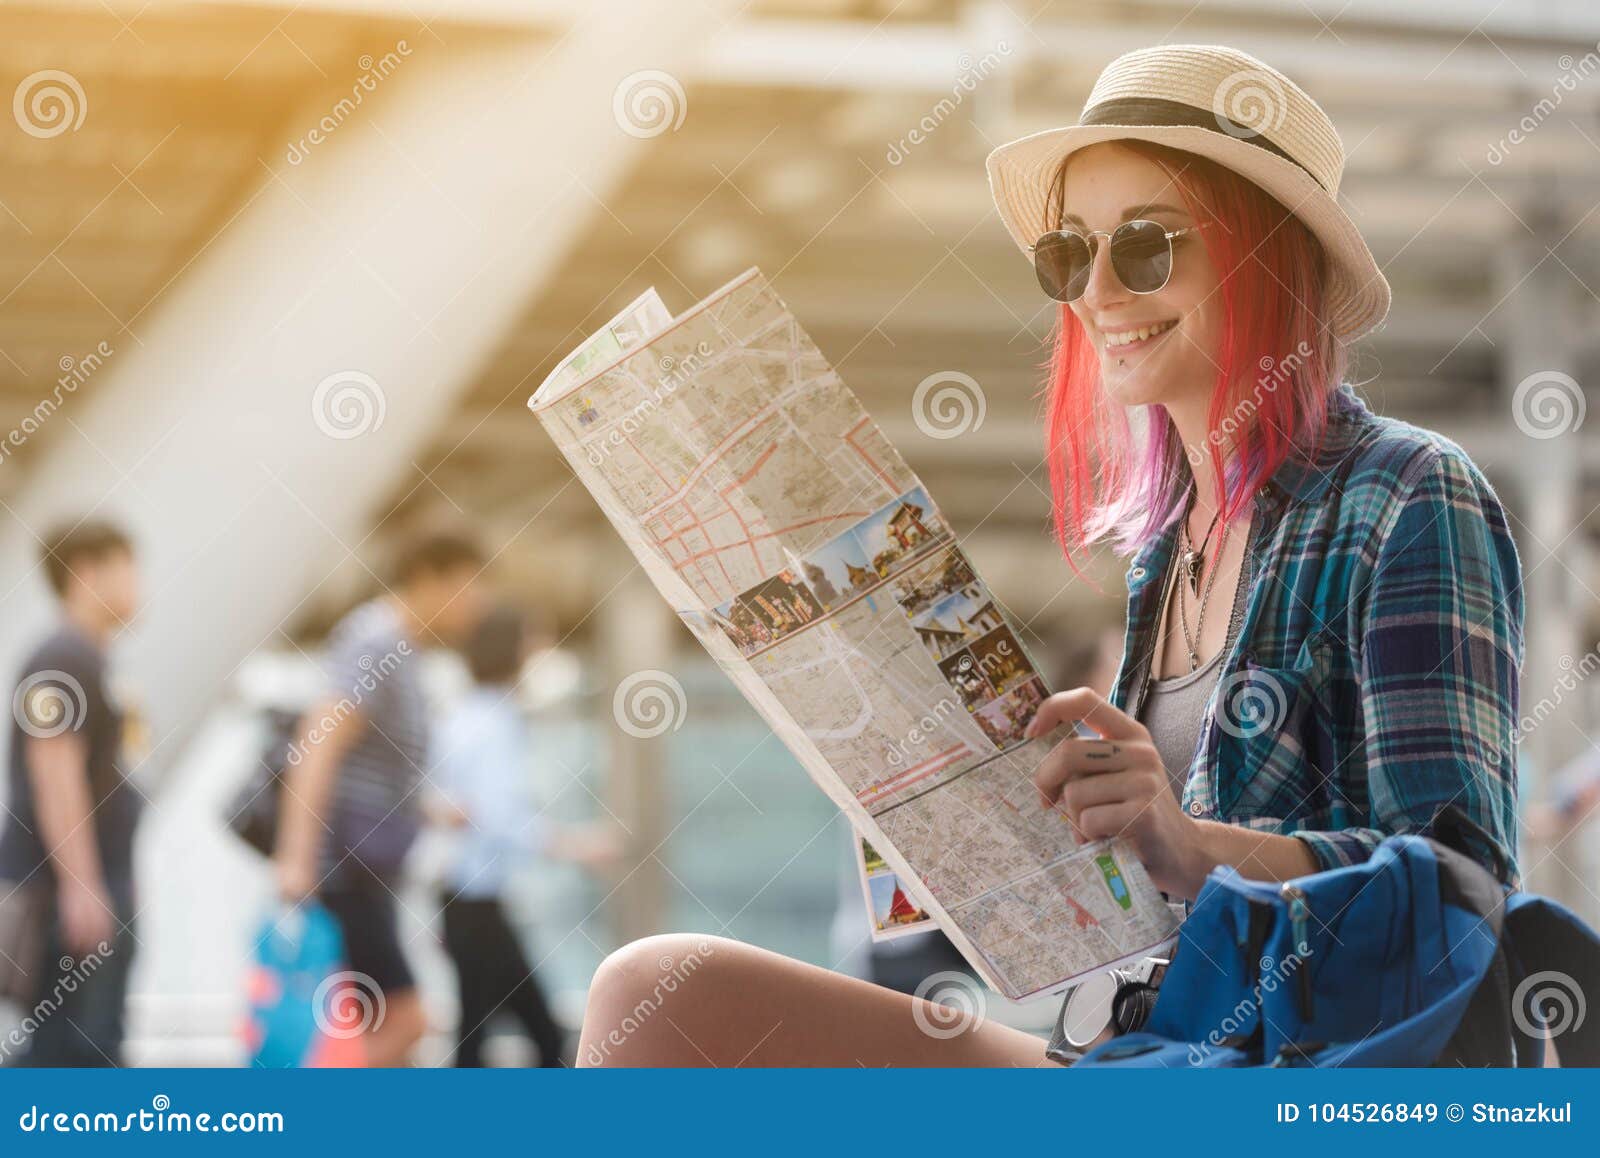 woman westerner looking at map during city tour in the morning,